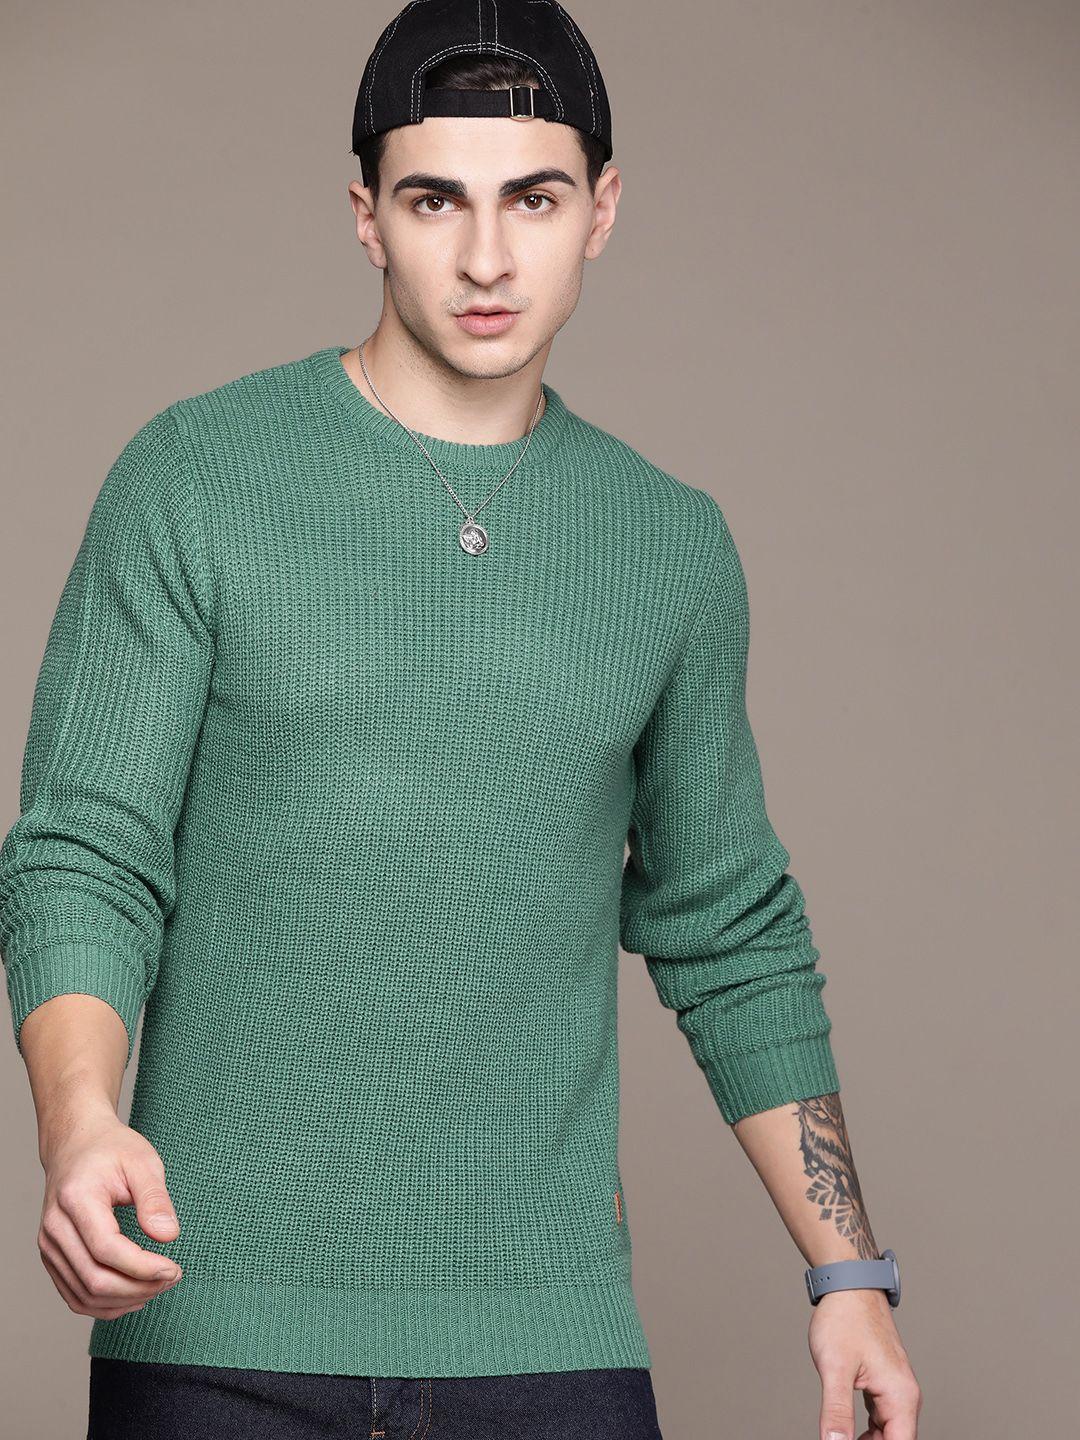 the-roadster-lifestyle-co.-pure-acrylic-ribbed-pullover